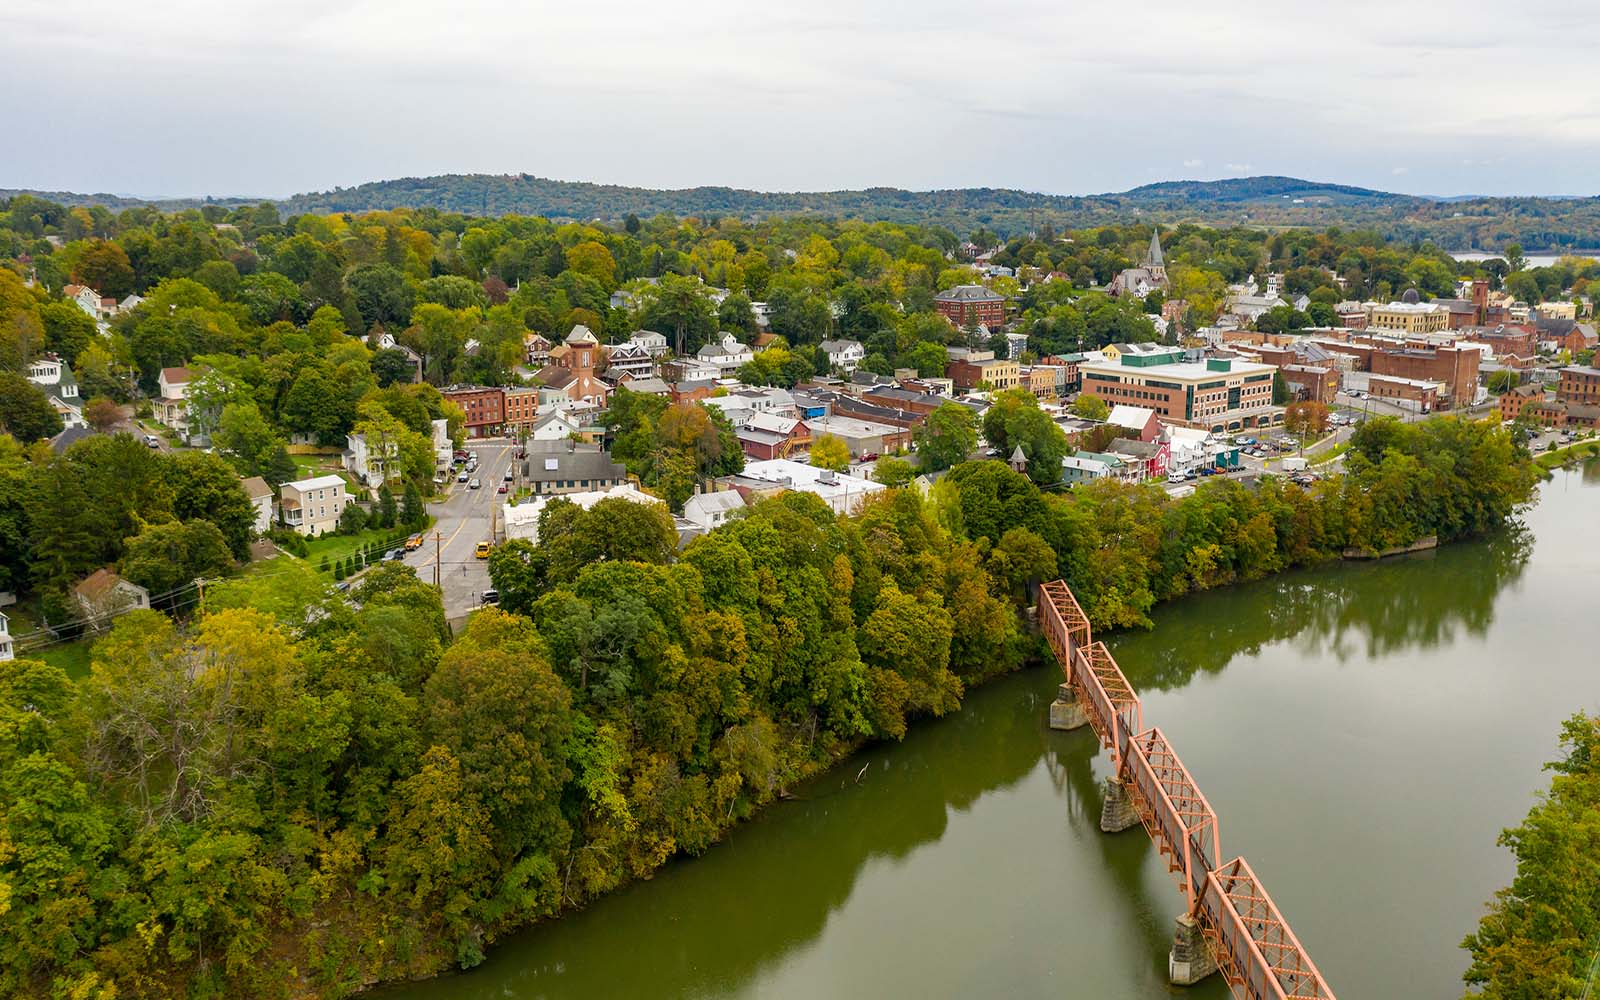 A New York State town alongside a river crossed by a bridge.